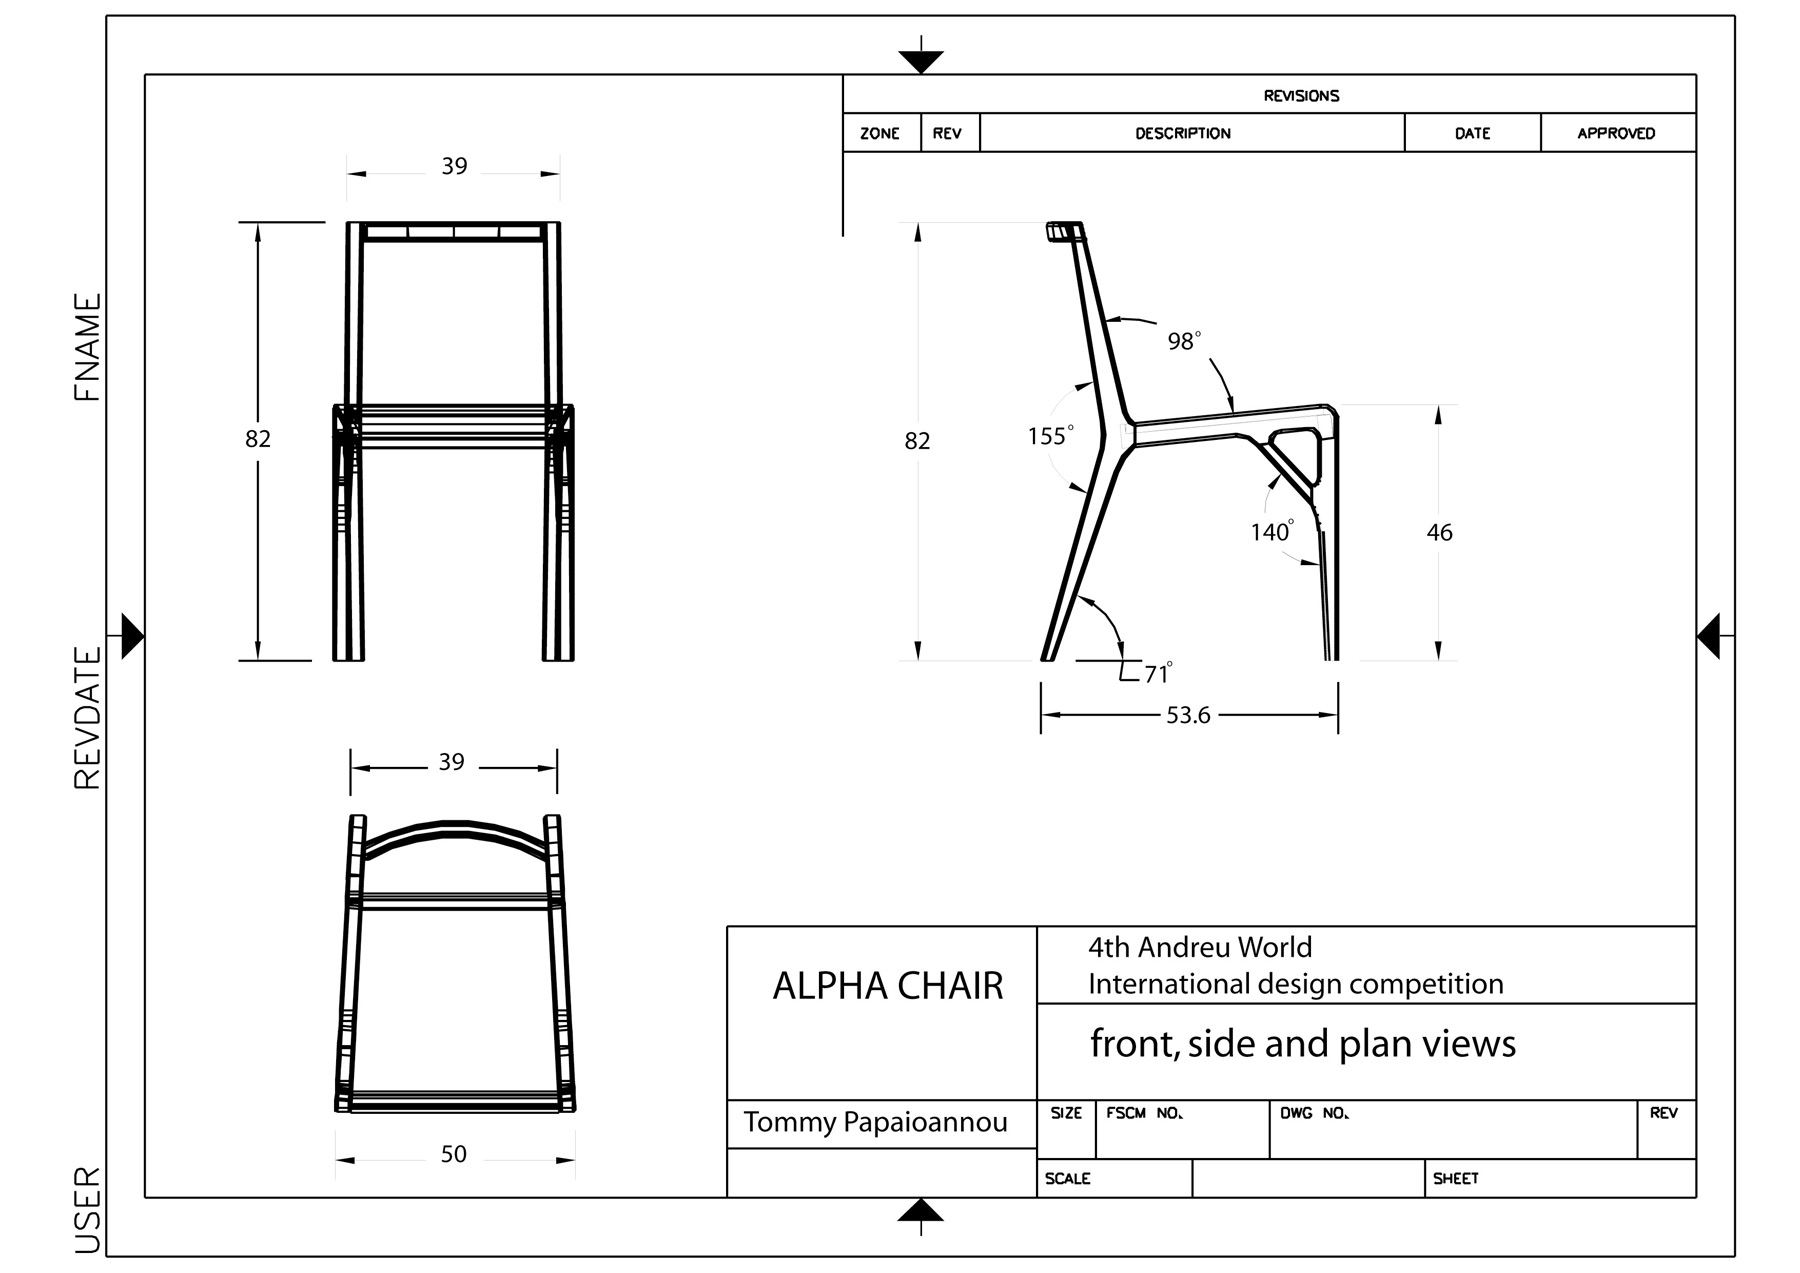 Chair Blueprints Plans DIY Free Download How To Build An ...